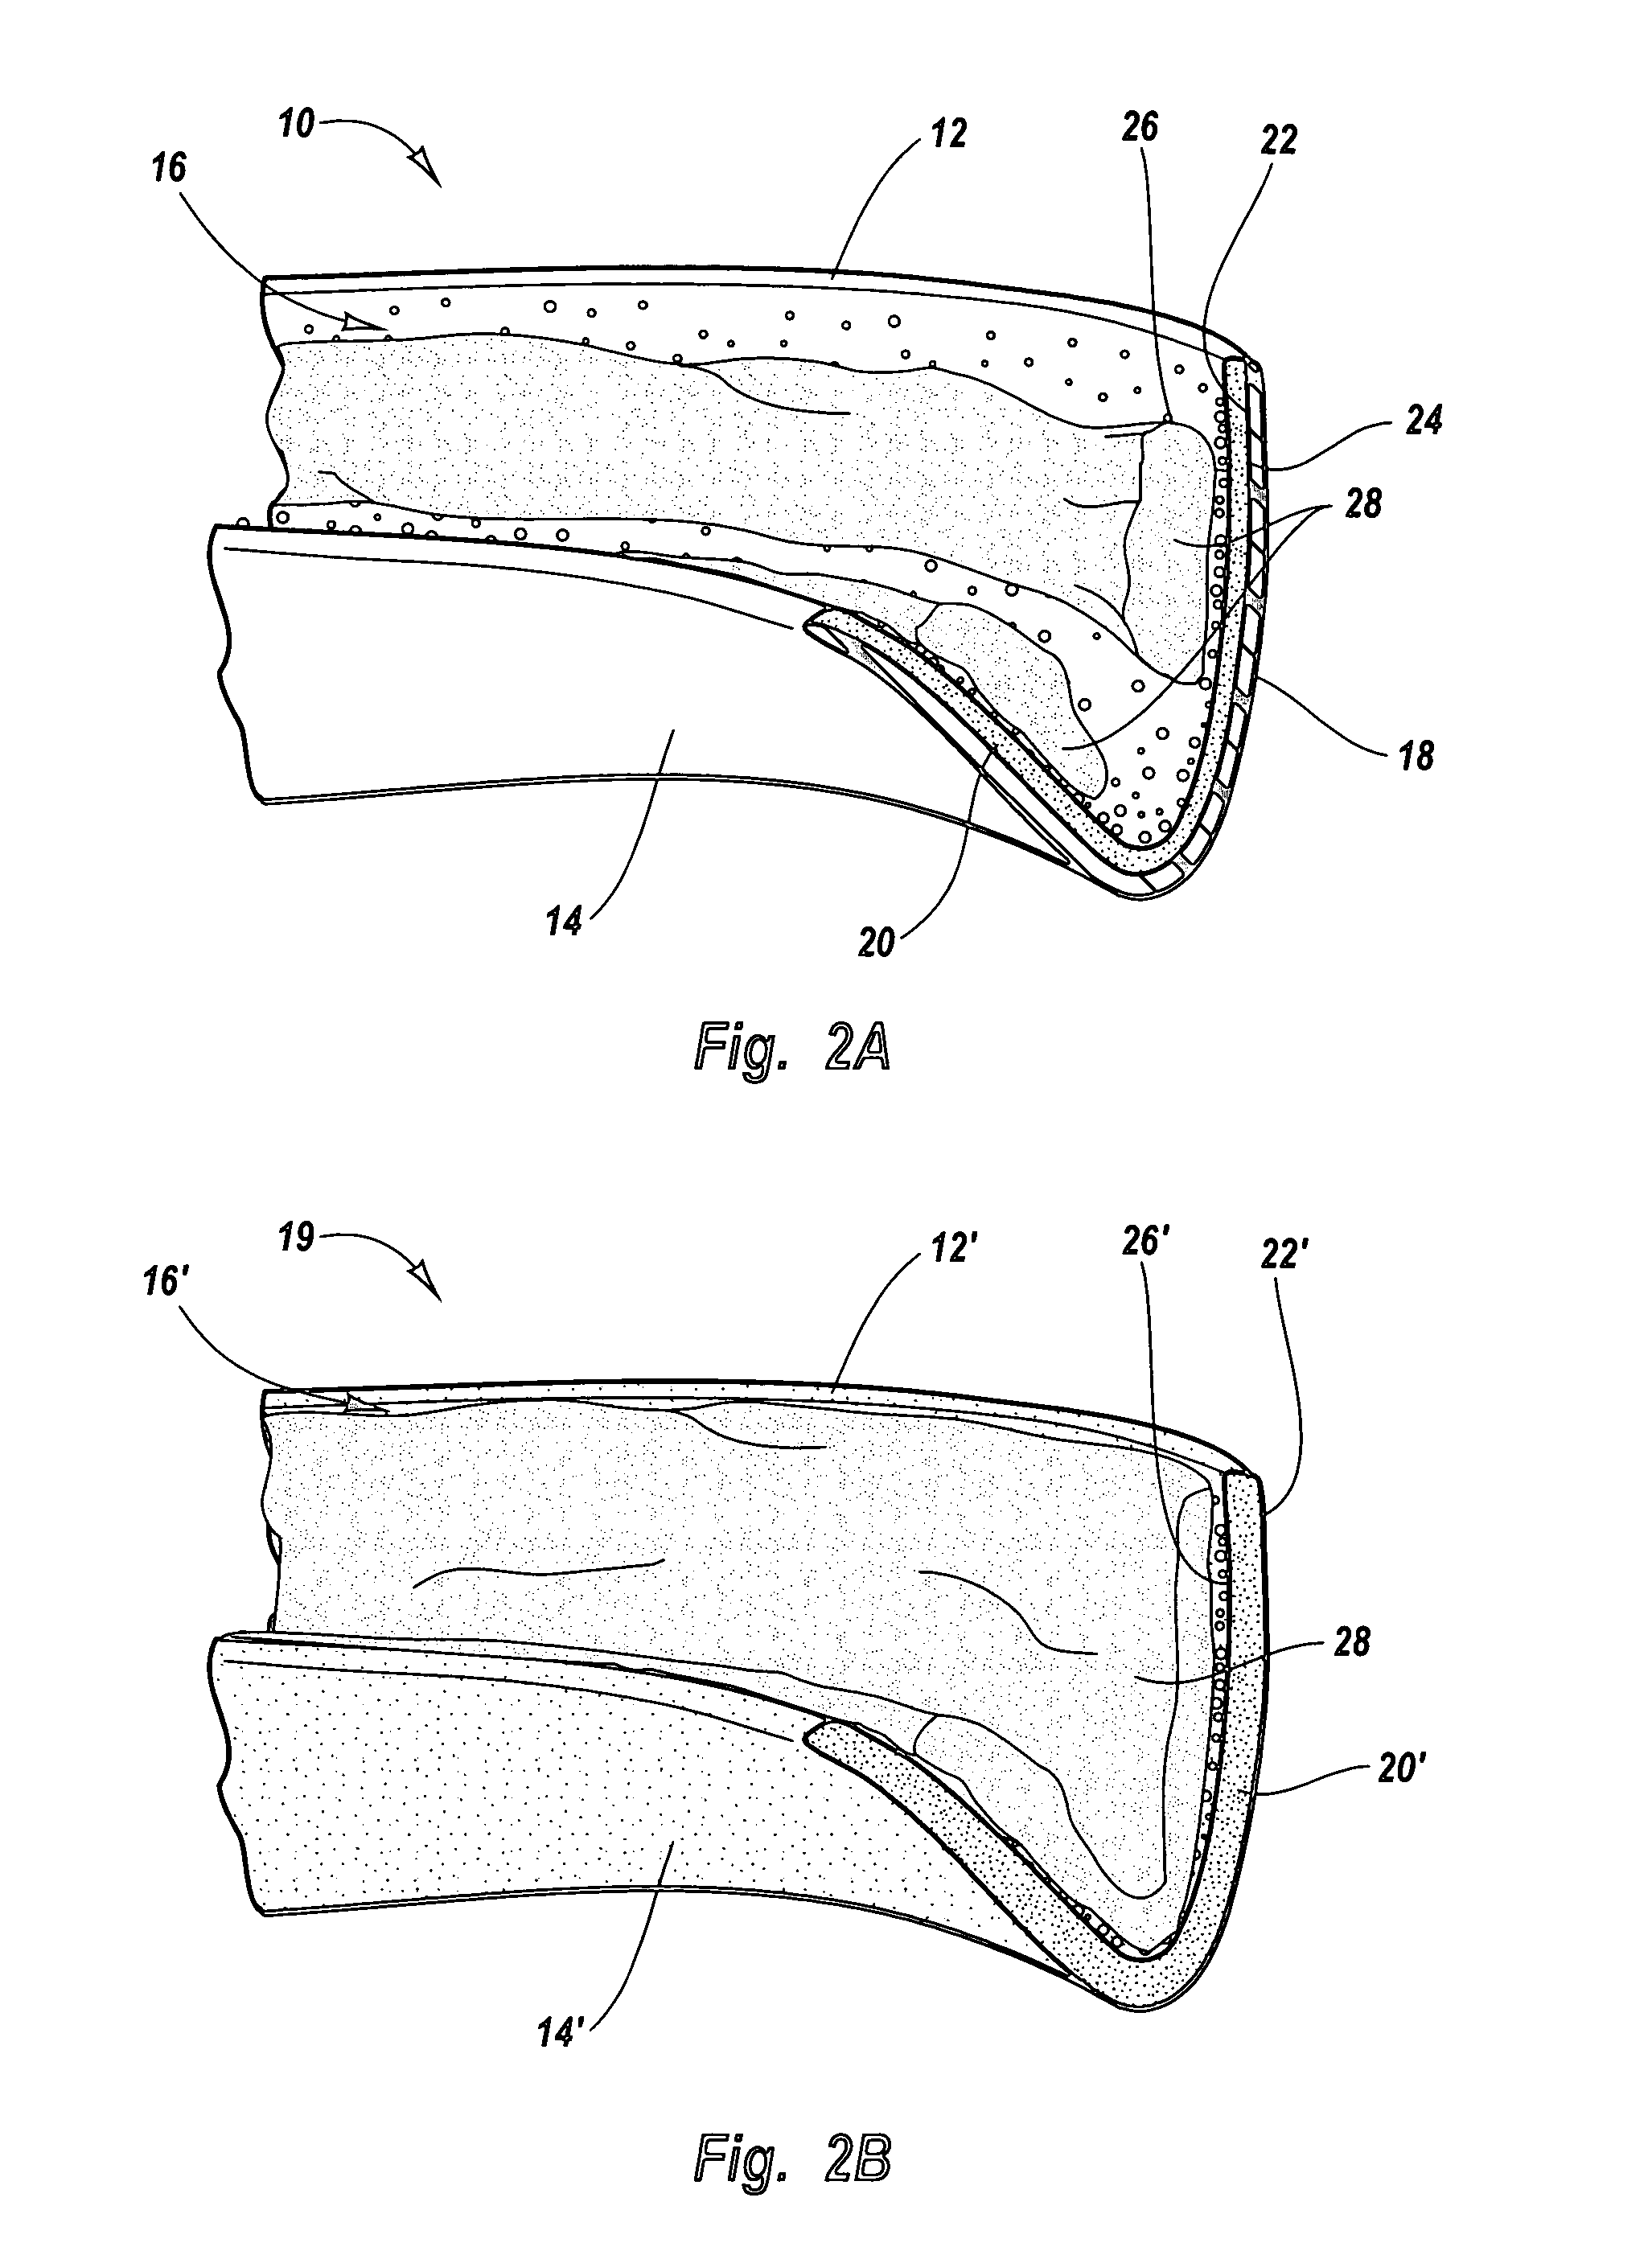 Dental bleaching compositions and devices having a solid activation adhesive layer or region and bleaching gel layer or region